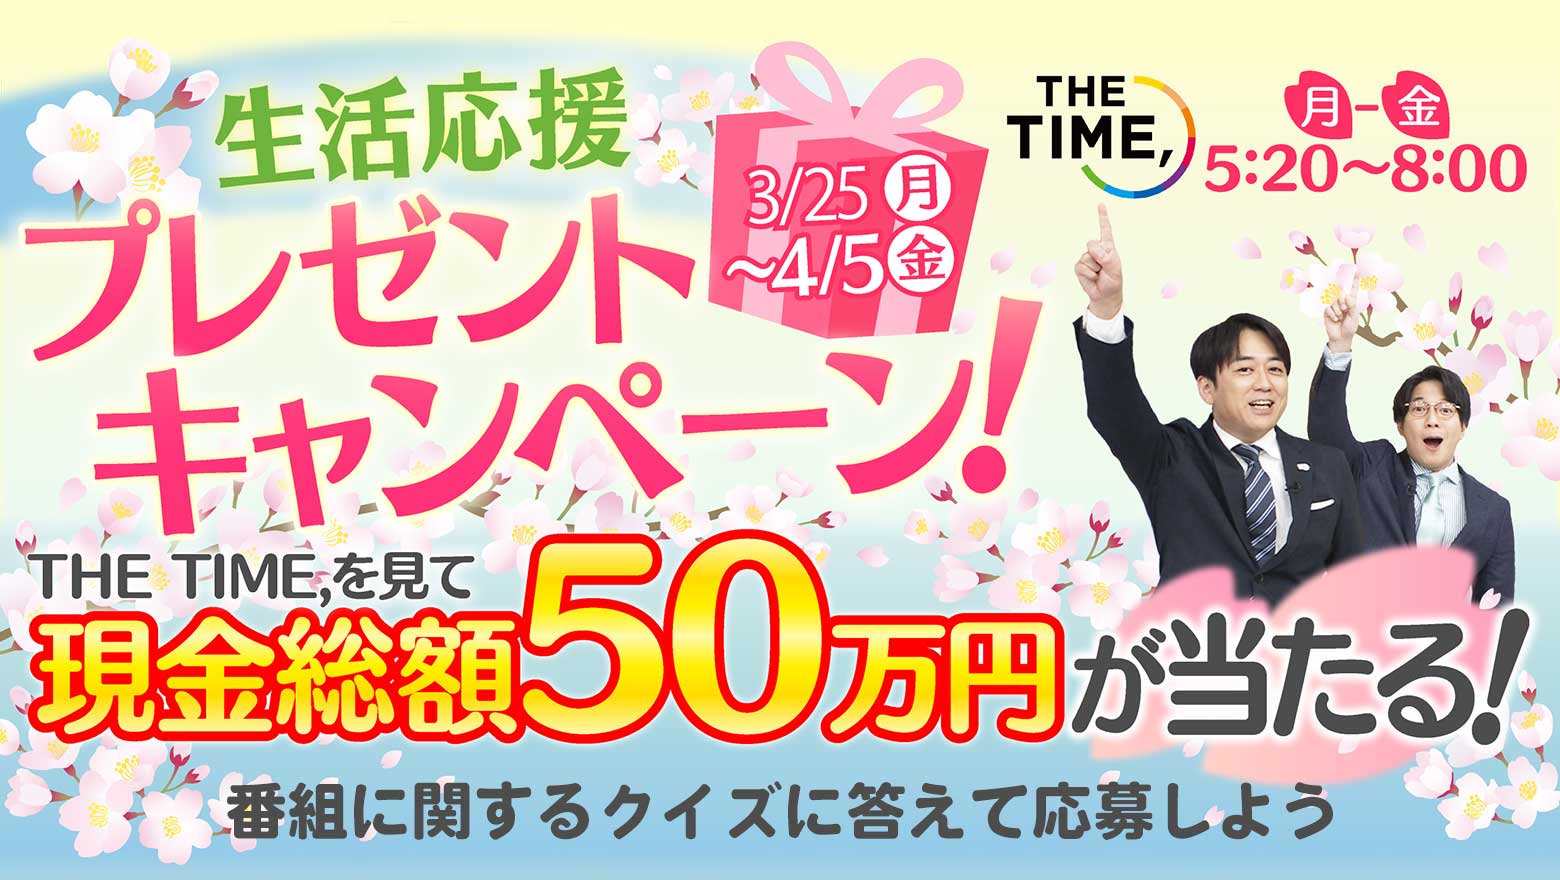 「THE TIME,」プレゼントキャンペーン